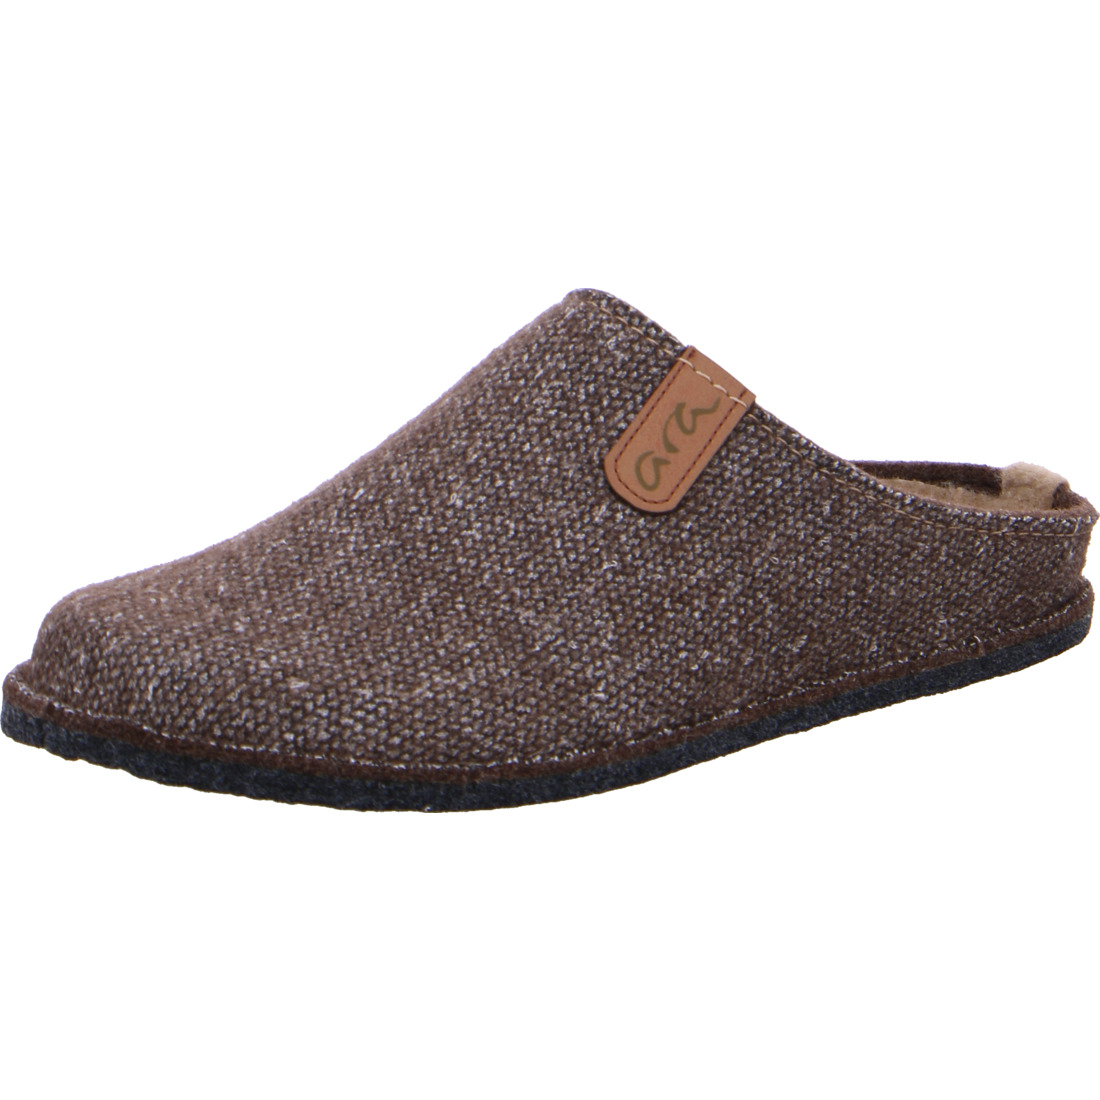 Mules*Ara Shoes Mules Chaussons Cosy